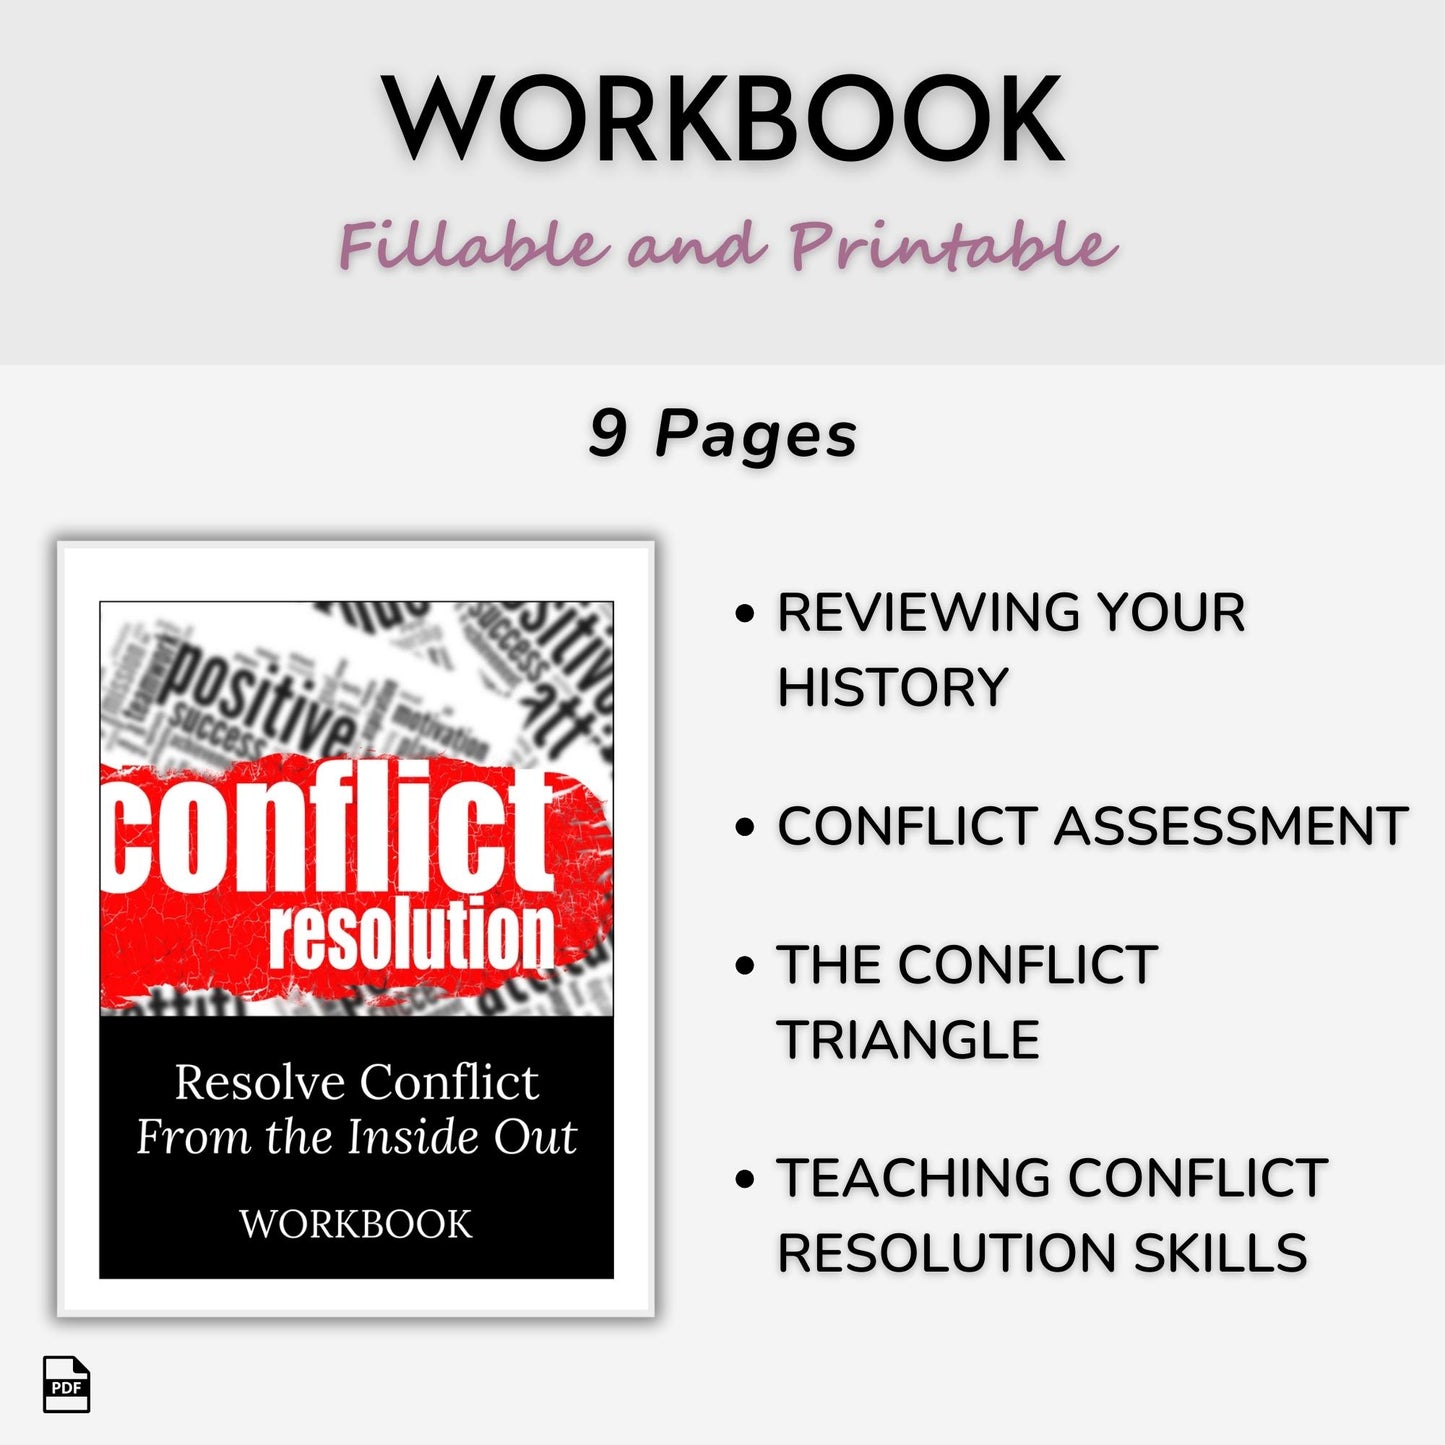 Resolve Conflict - From the Inside Out